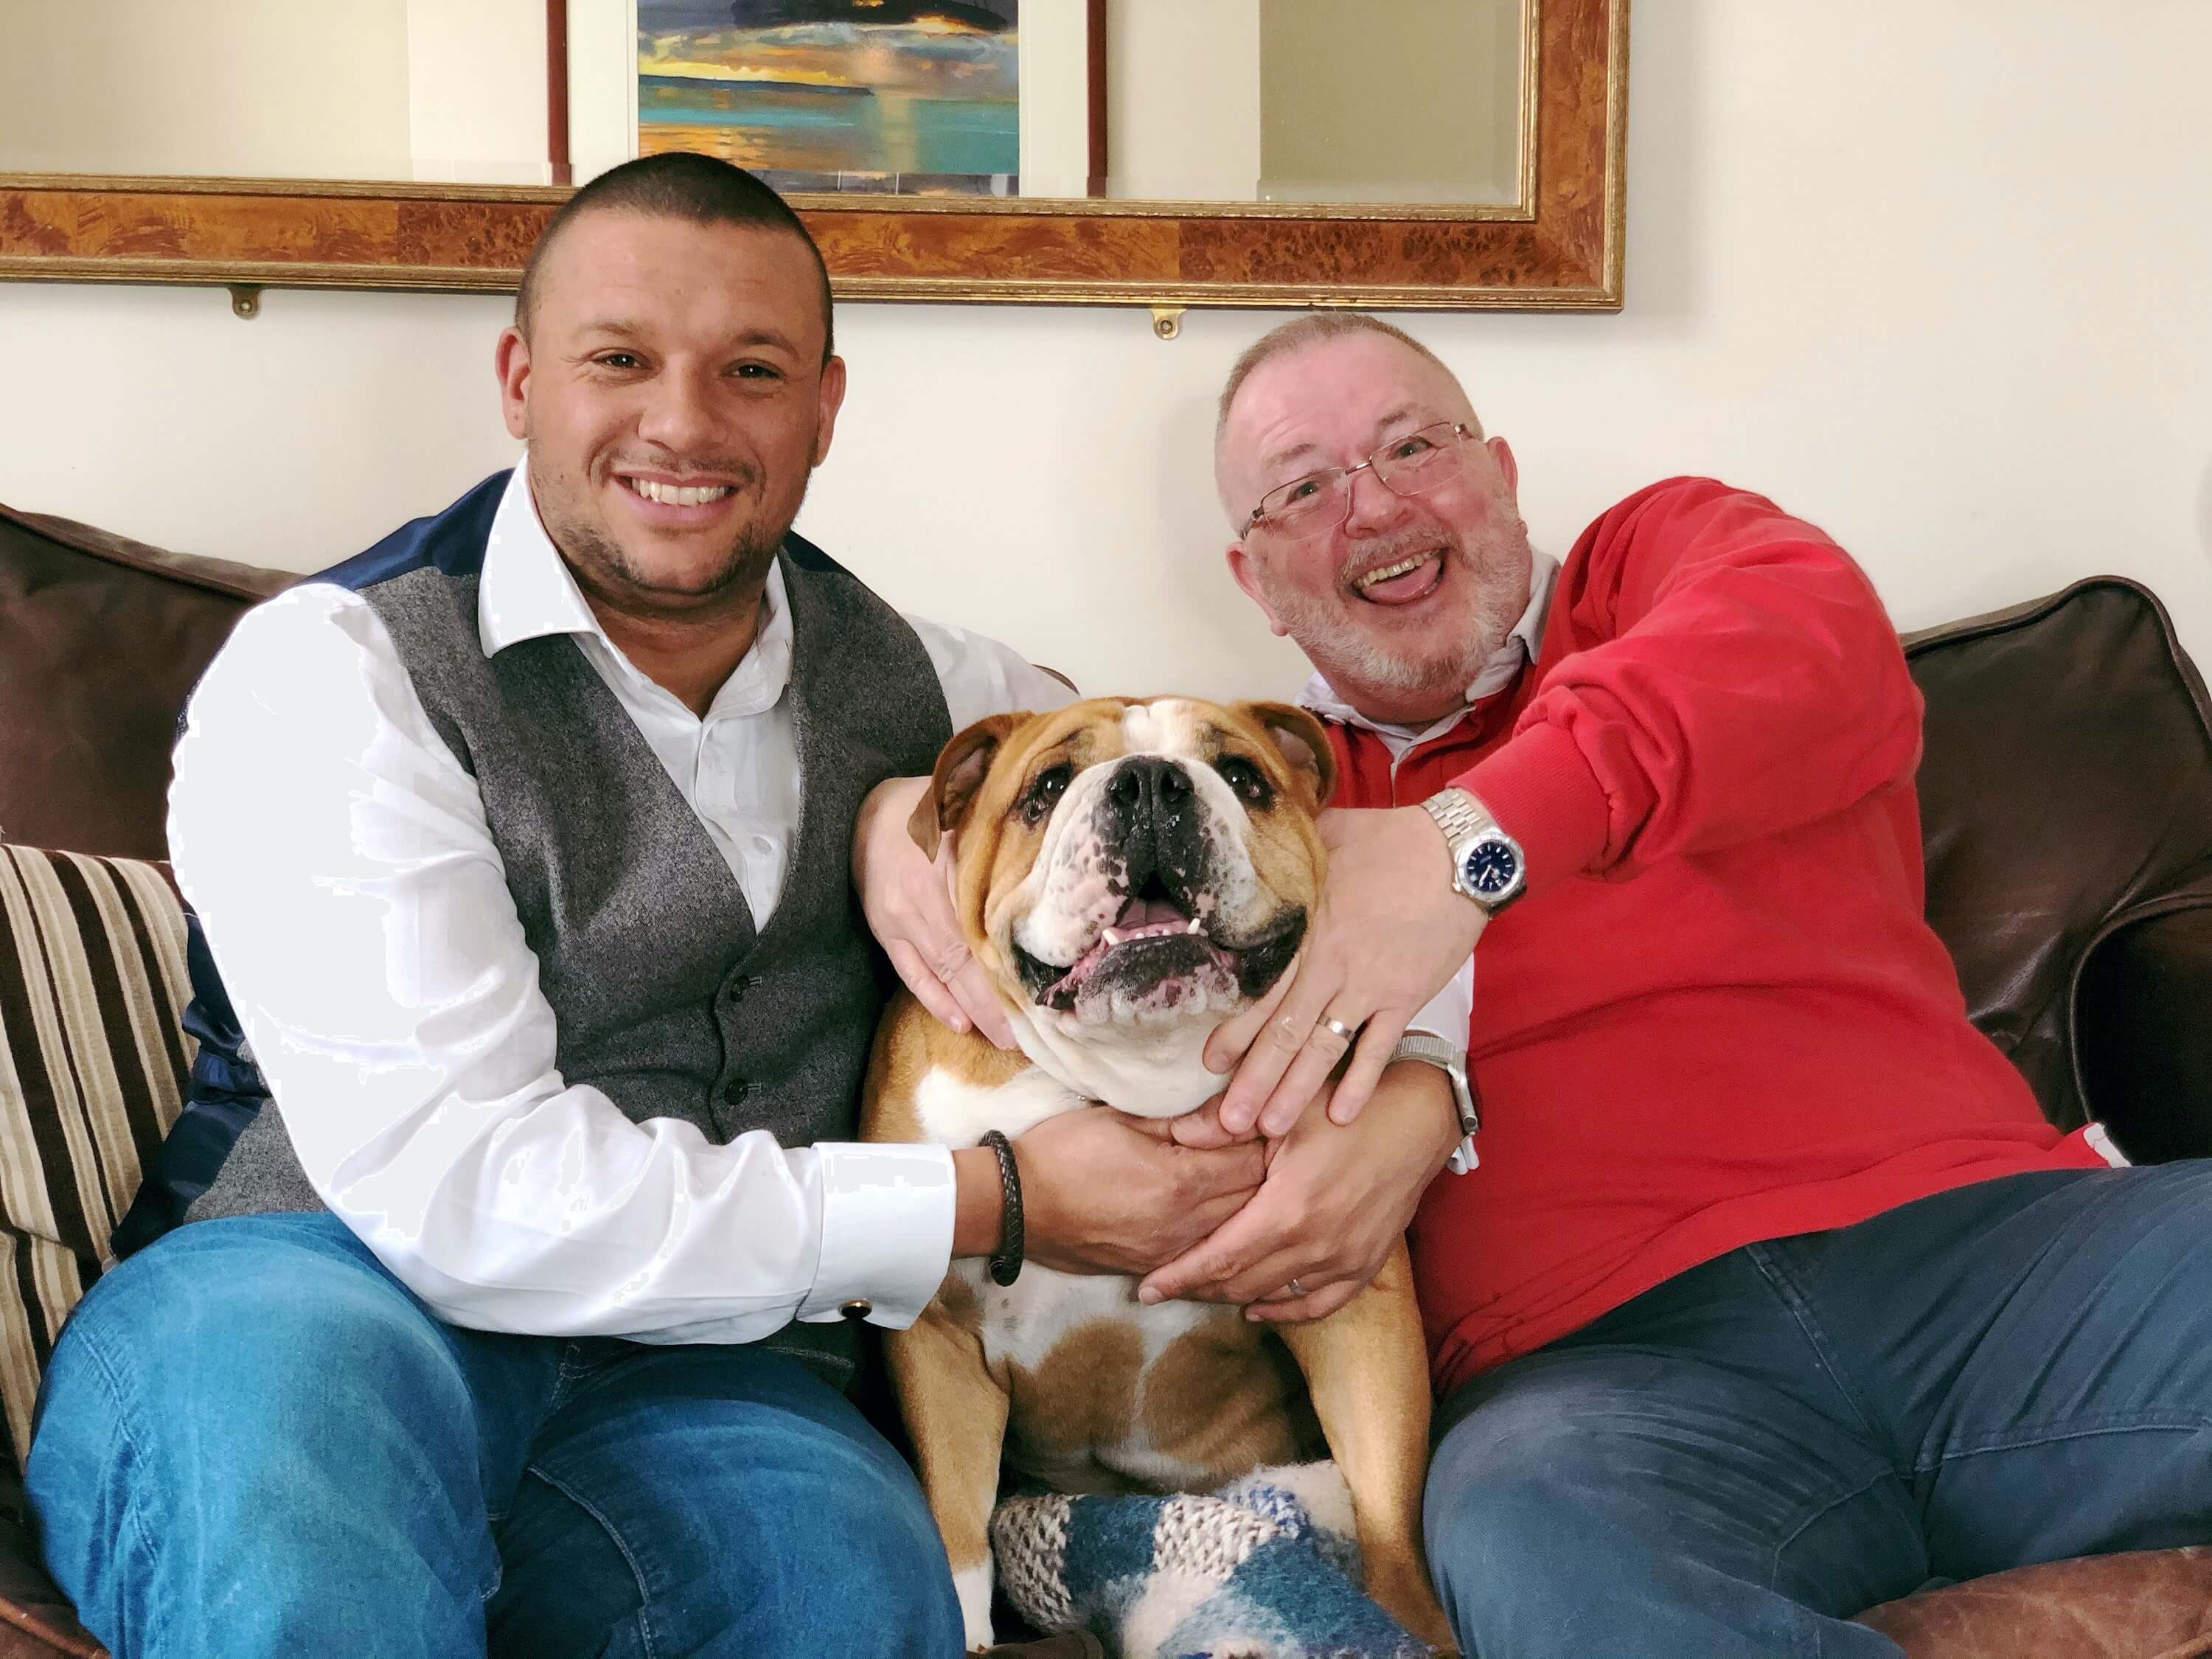 Two foster carers, Barnaby and Steven, sat on a sofa together with their bulldog.